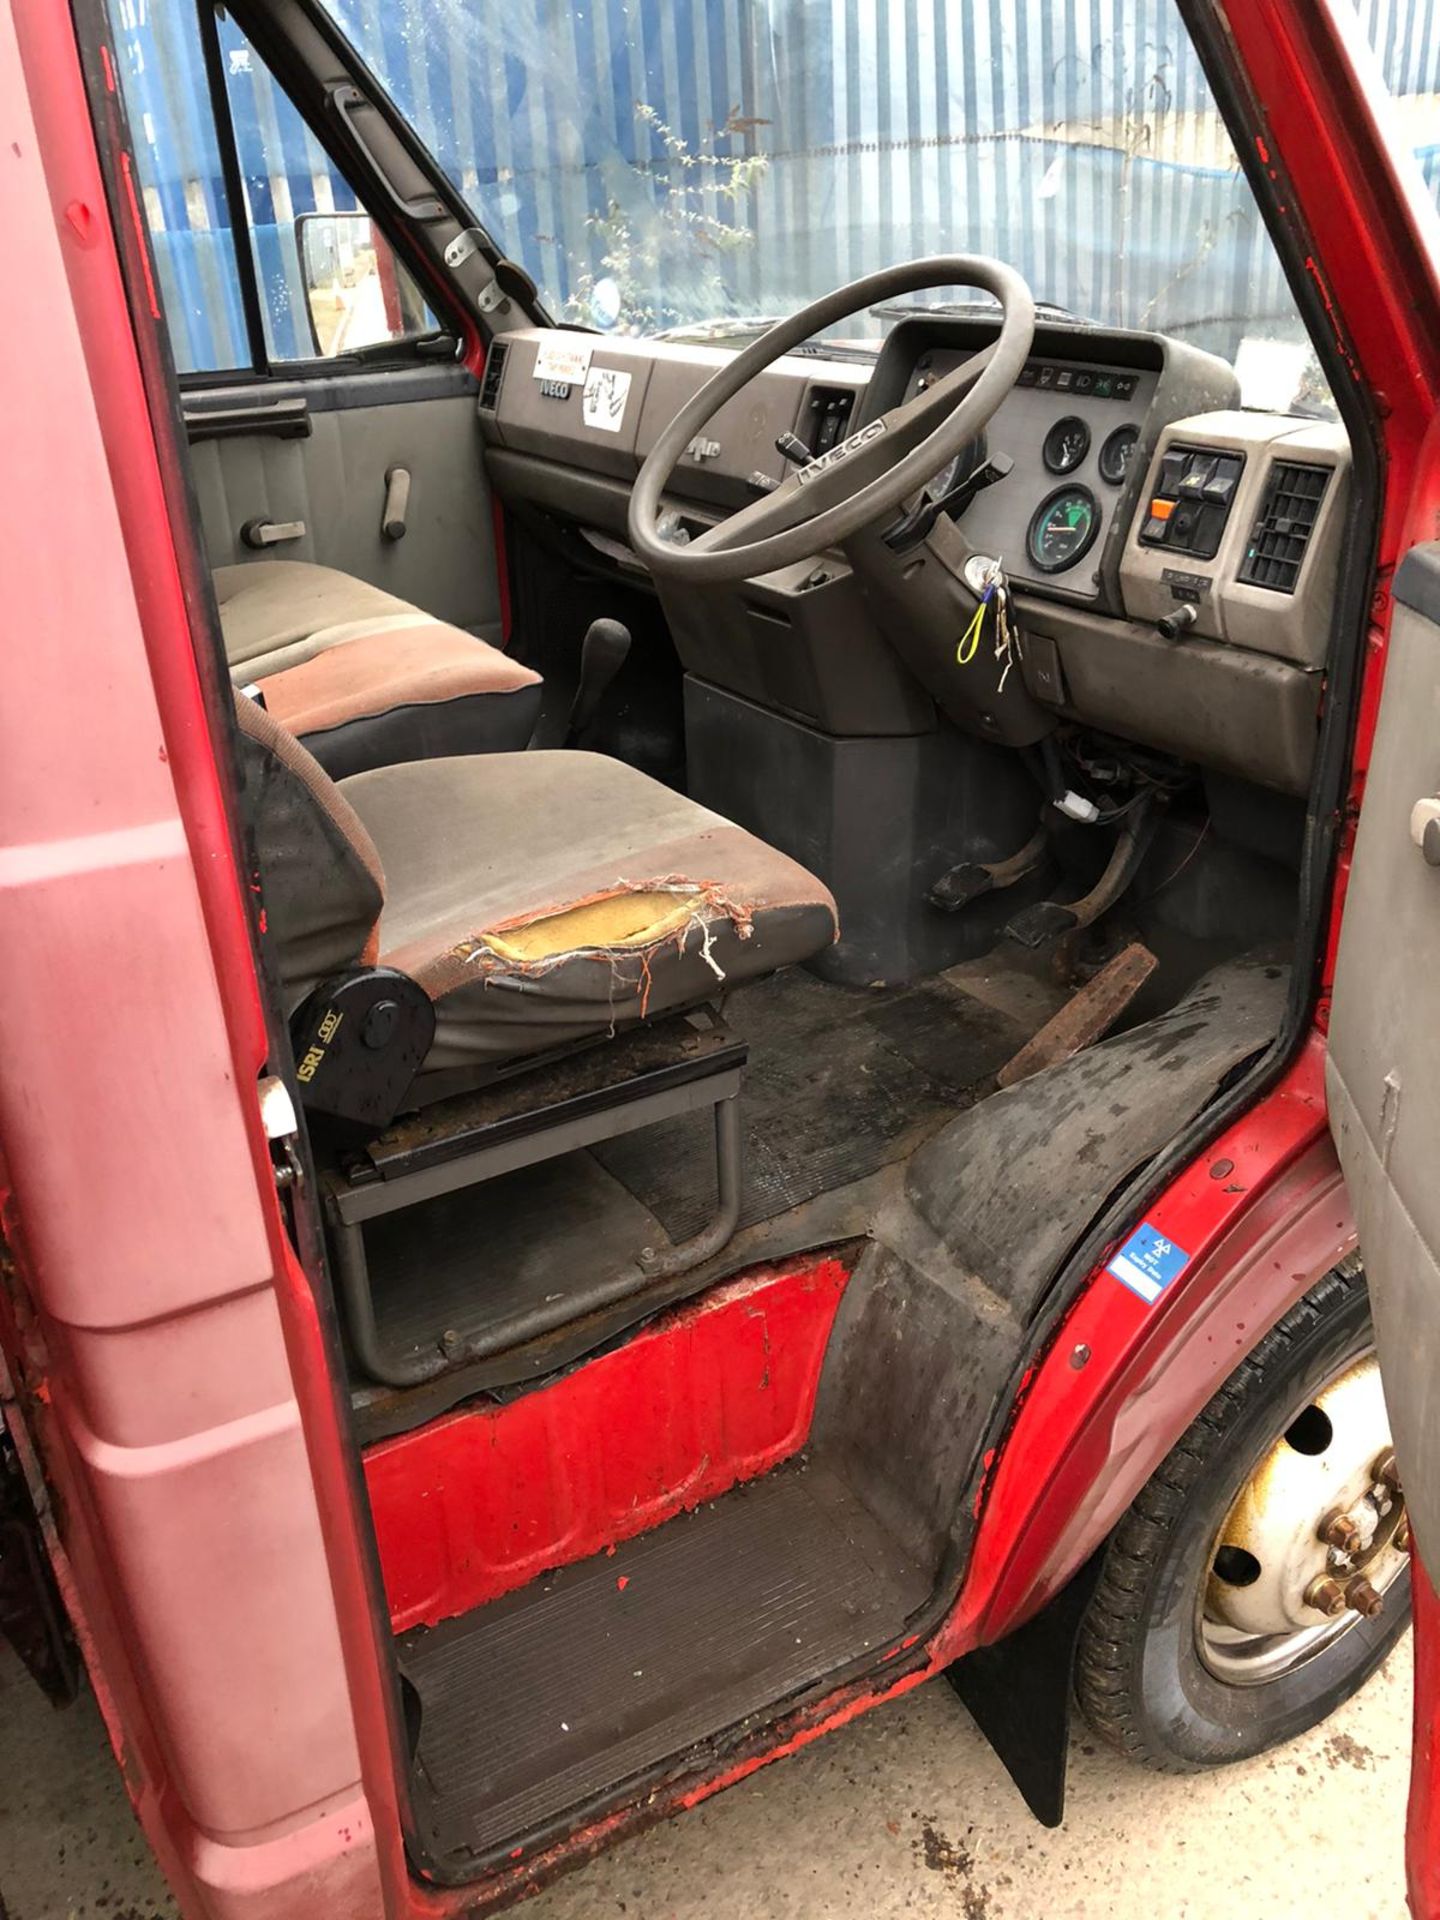 IVECO DAILY 4910 BOX VAN / OFFICE, 2.5 TURBO DIESEL (FIAT TYPE), SHOWING 34K MILES *NO VAT* - Image 16 of 18